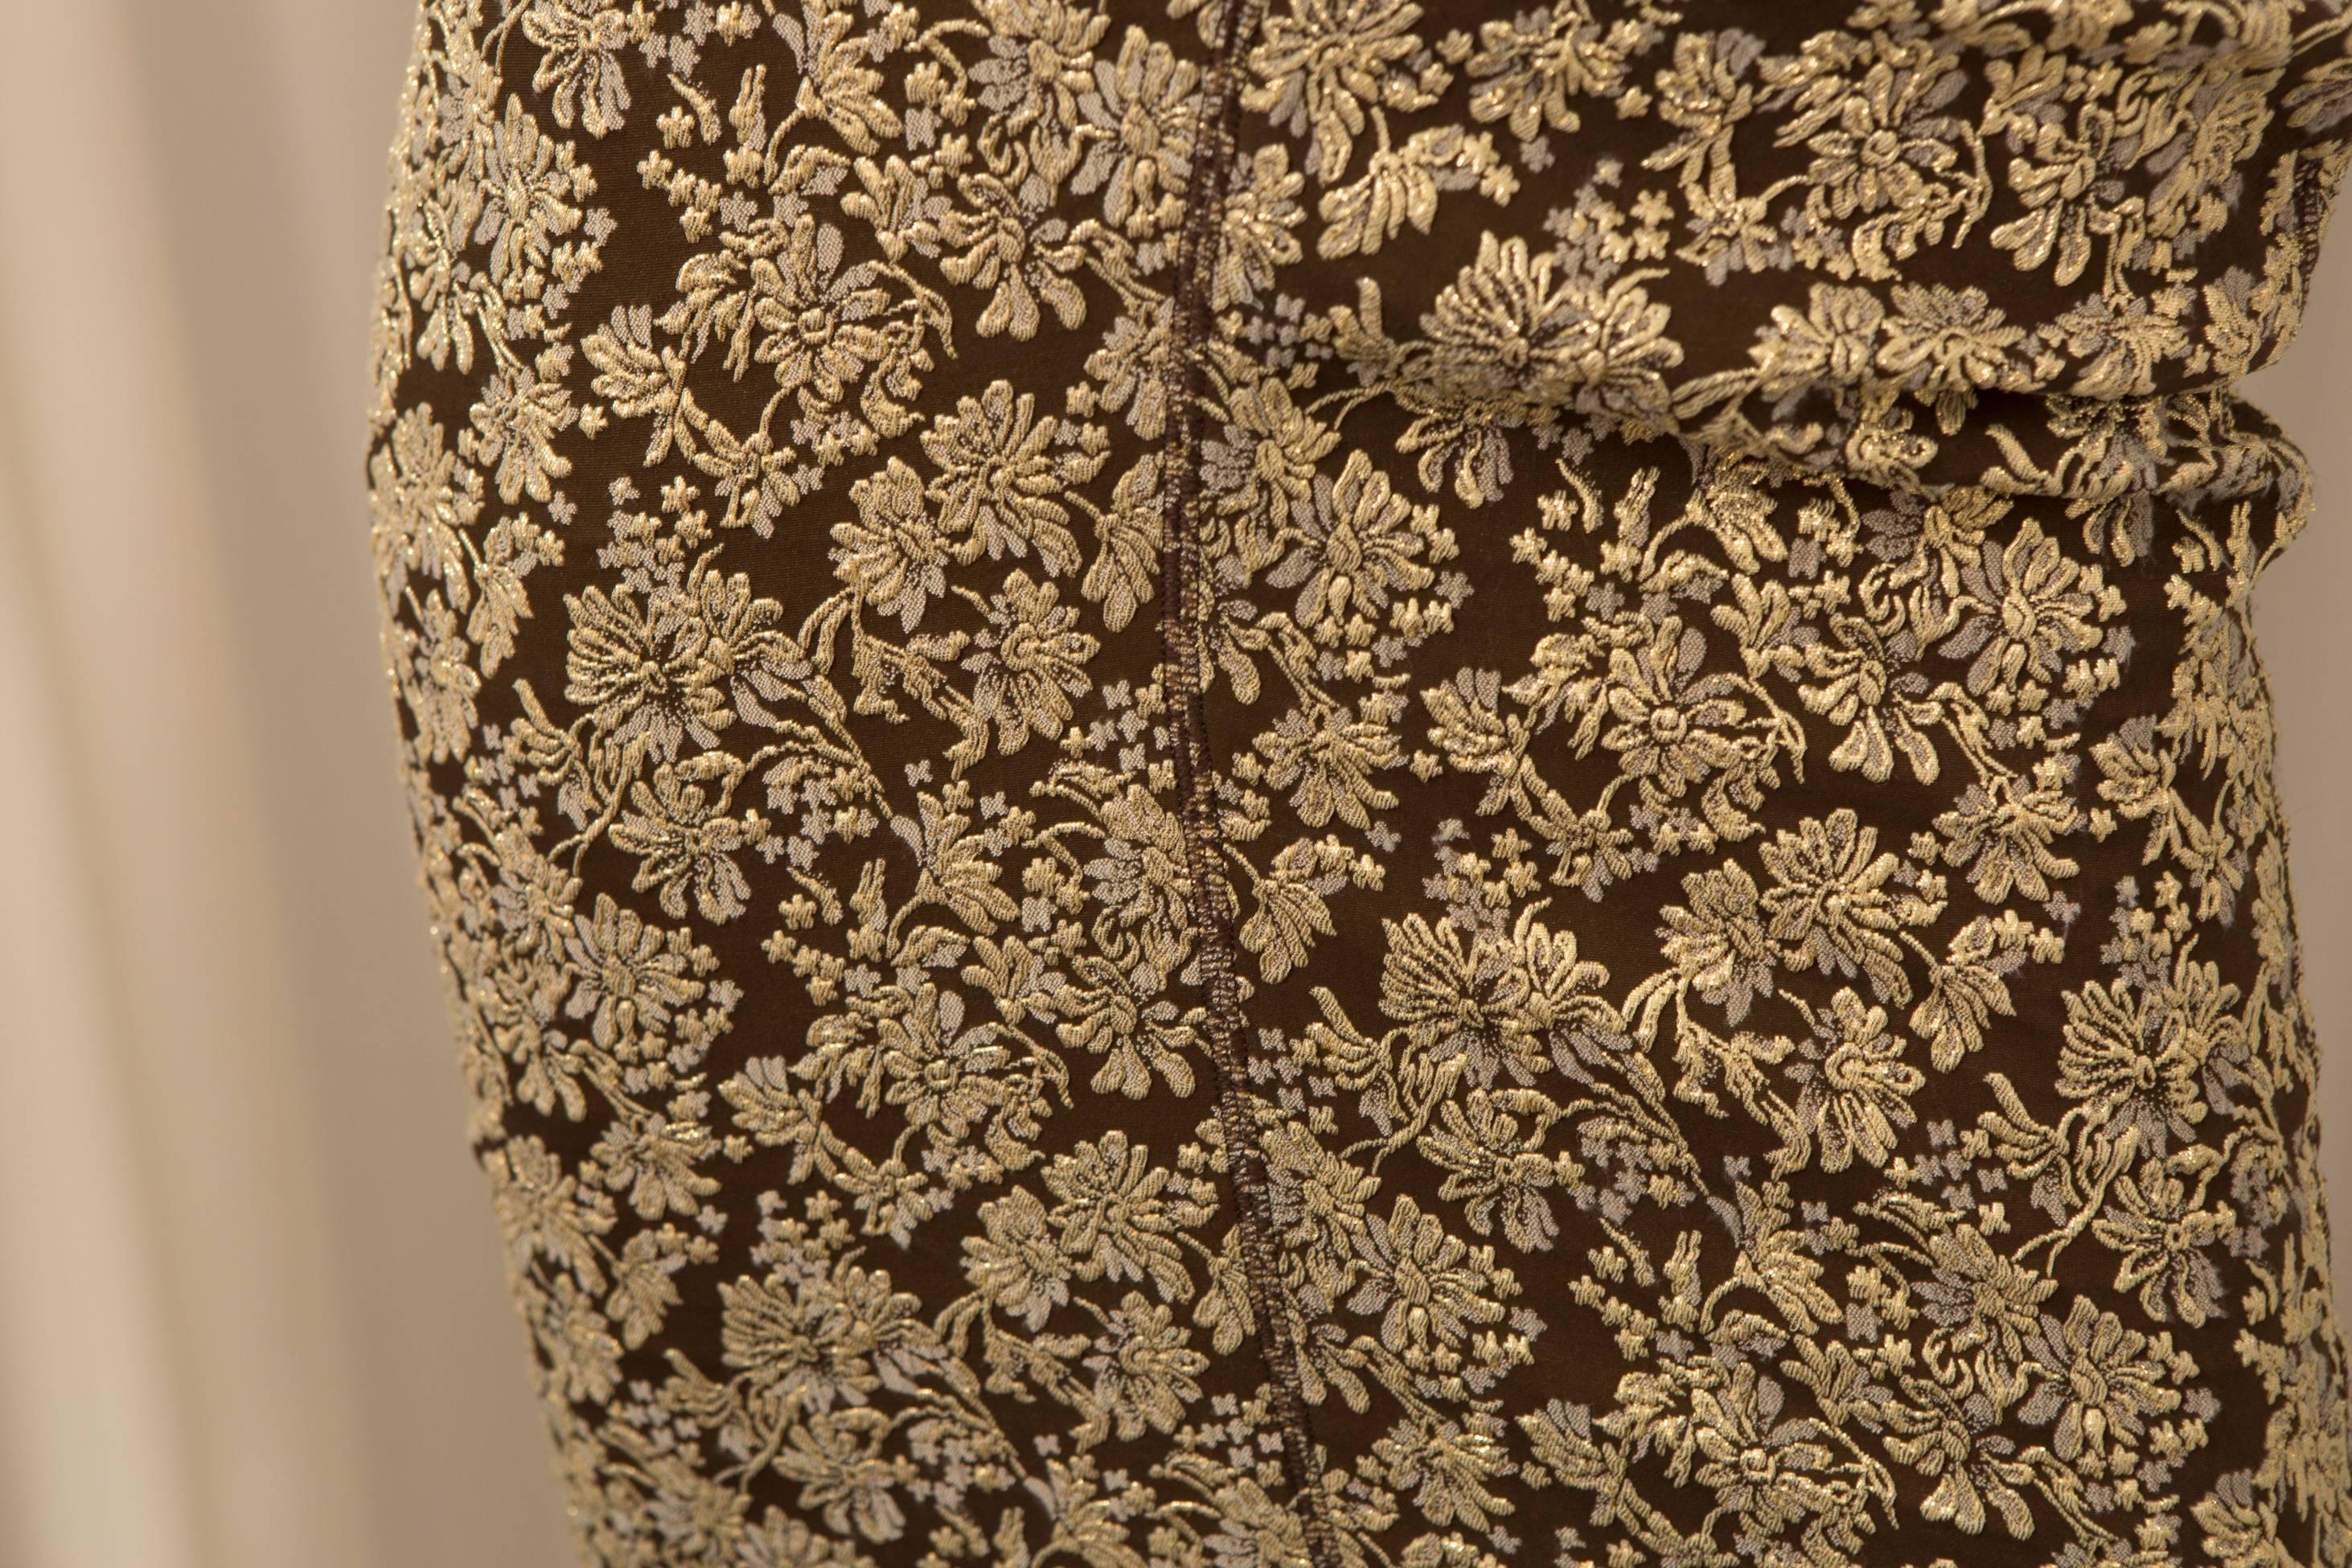 Marc Jacobs Gold and Brown Floral Brocade Dress 2